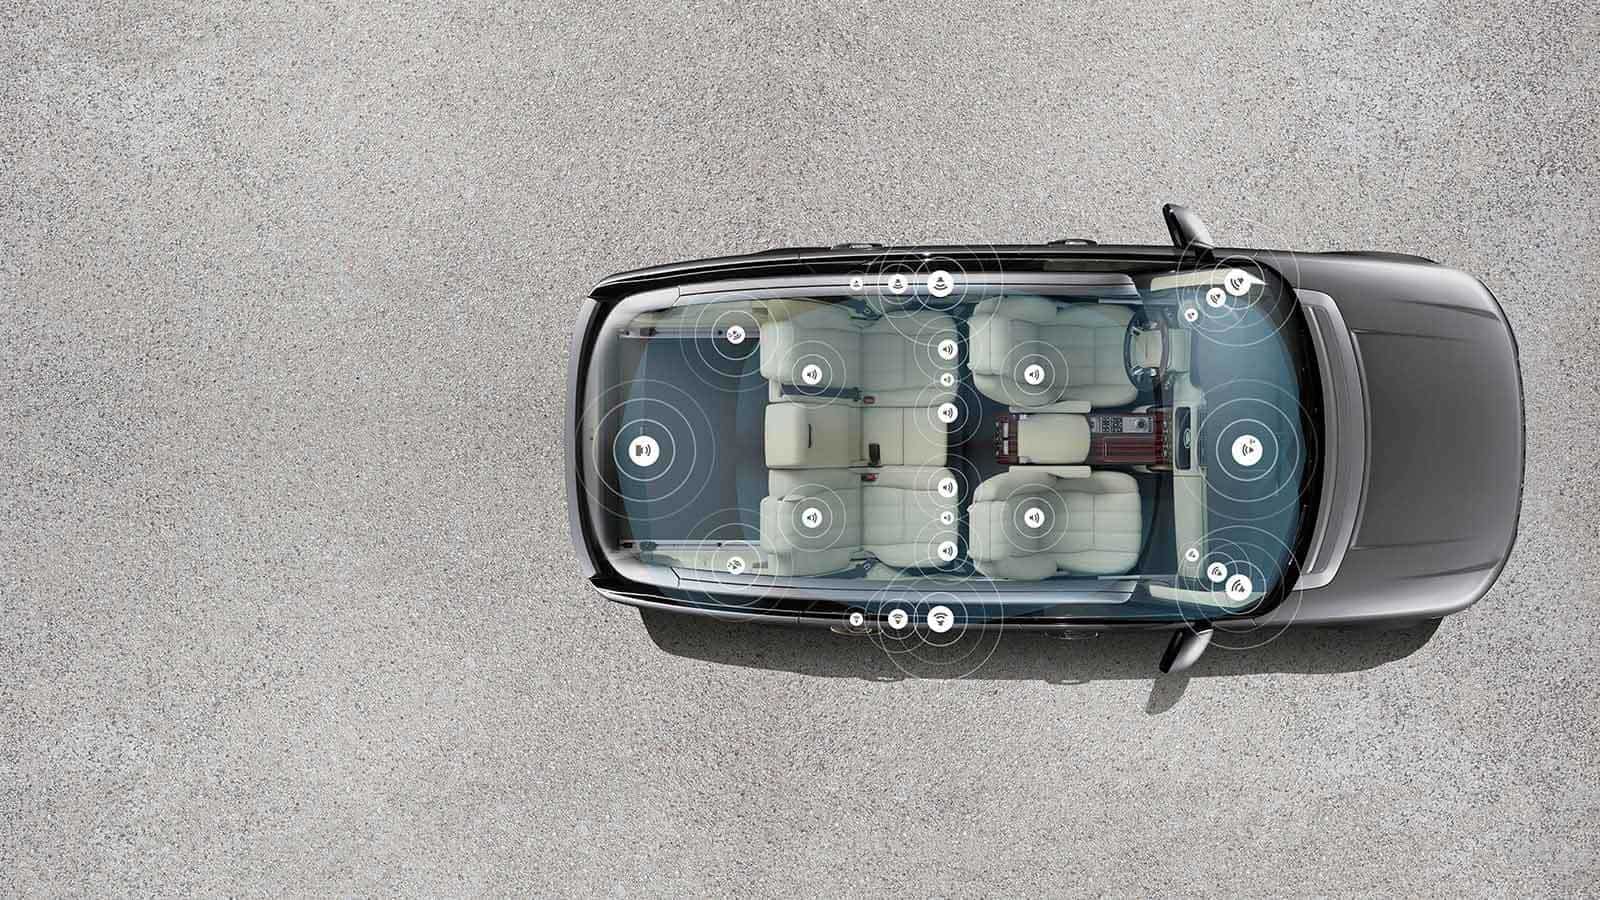 Vehicle top view with sound system icons in detail